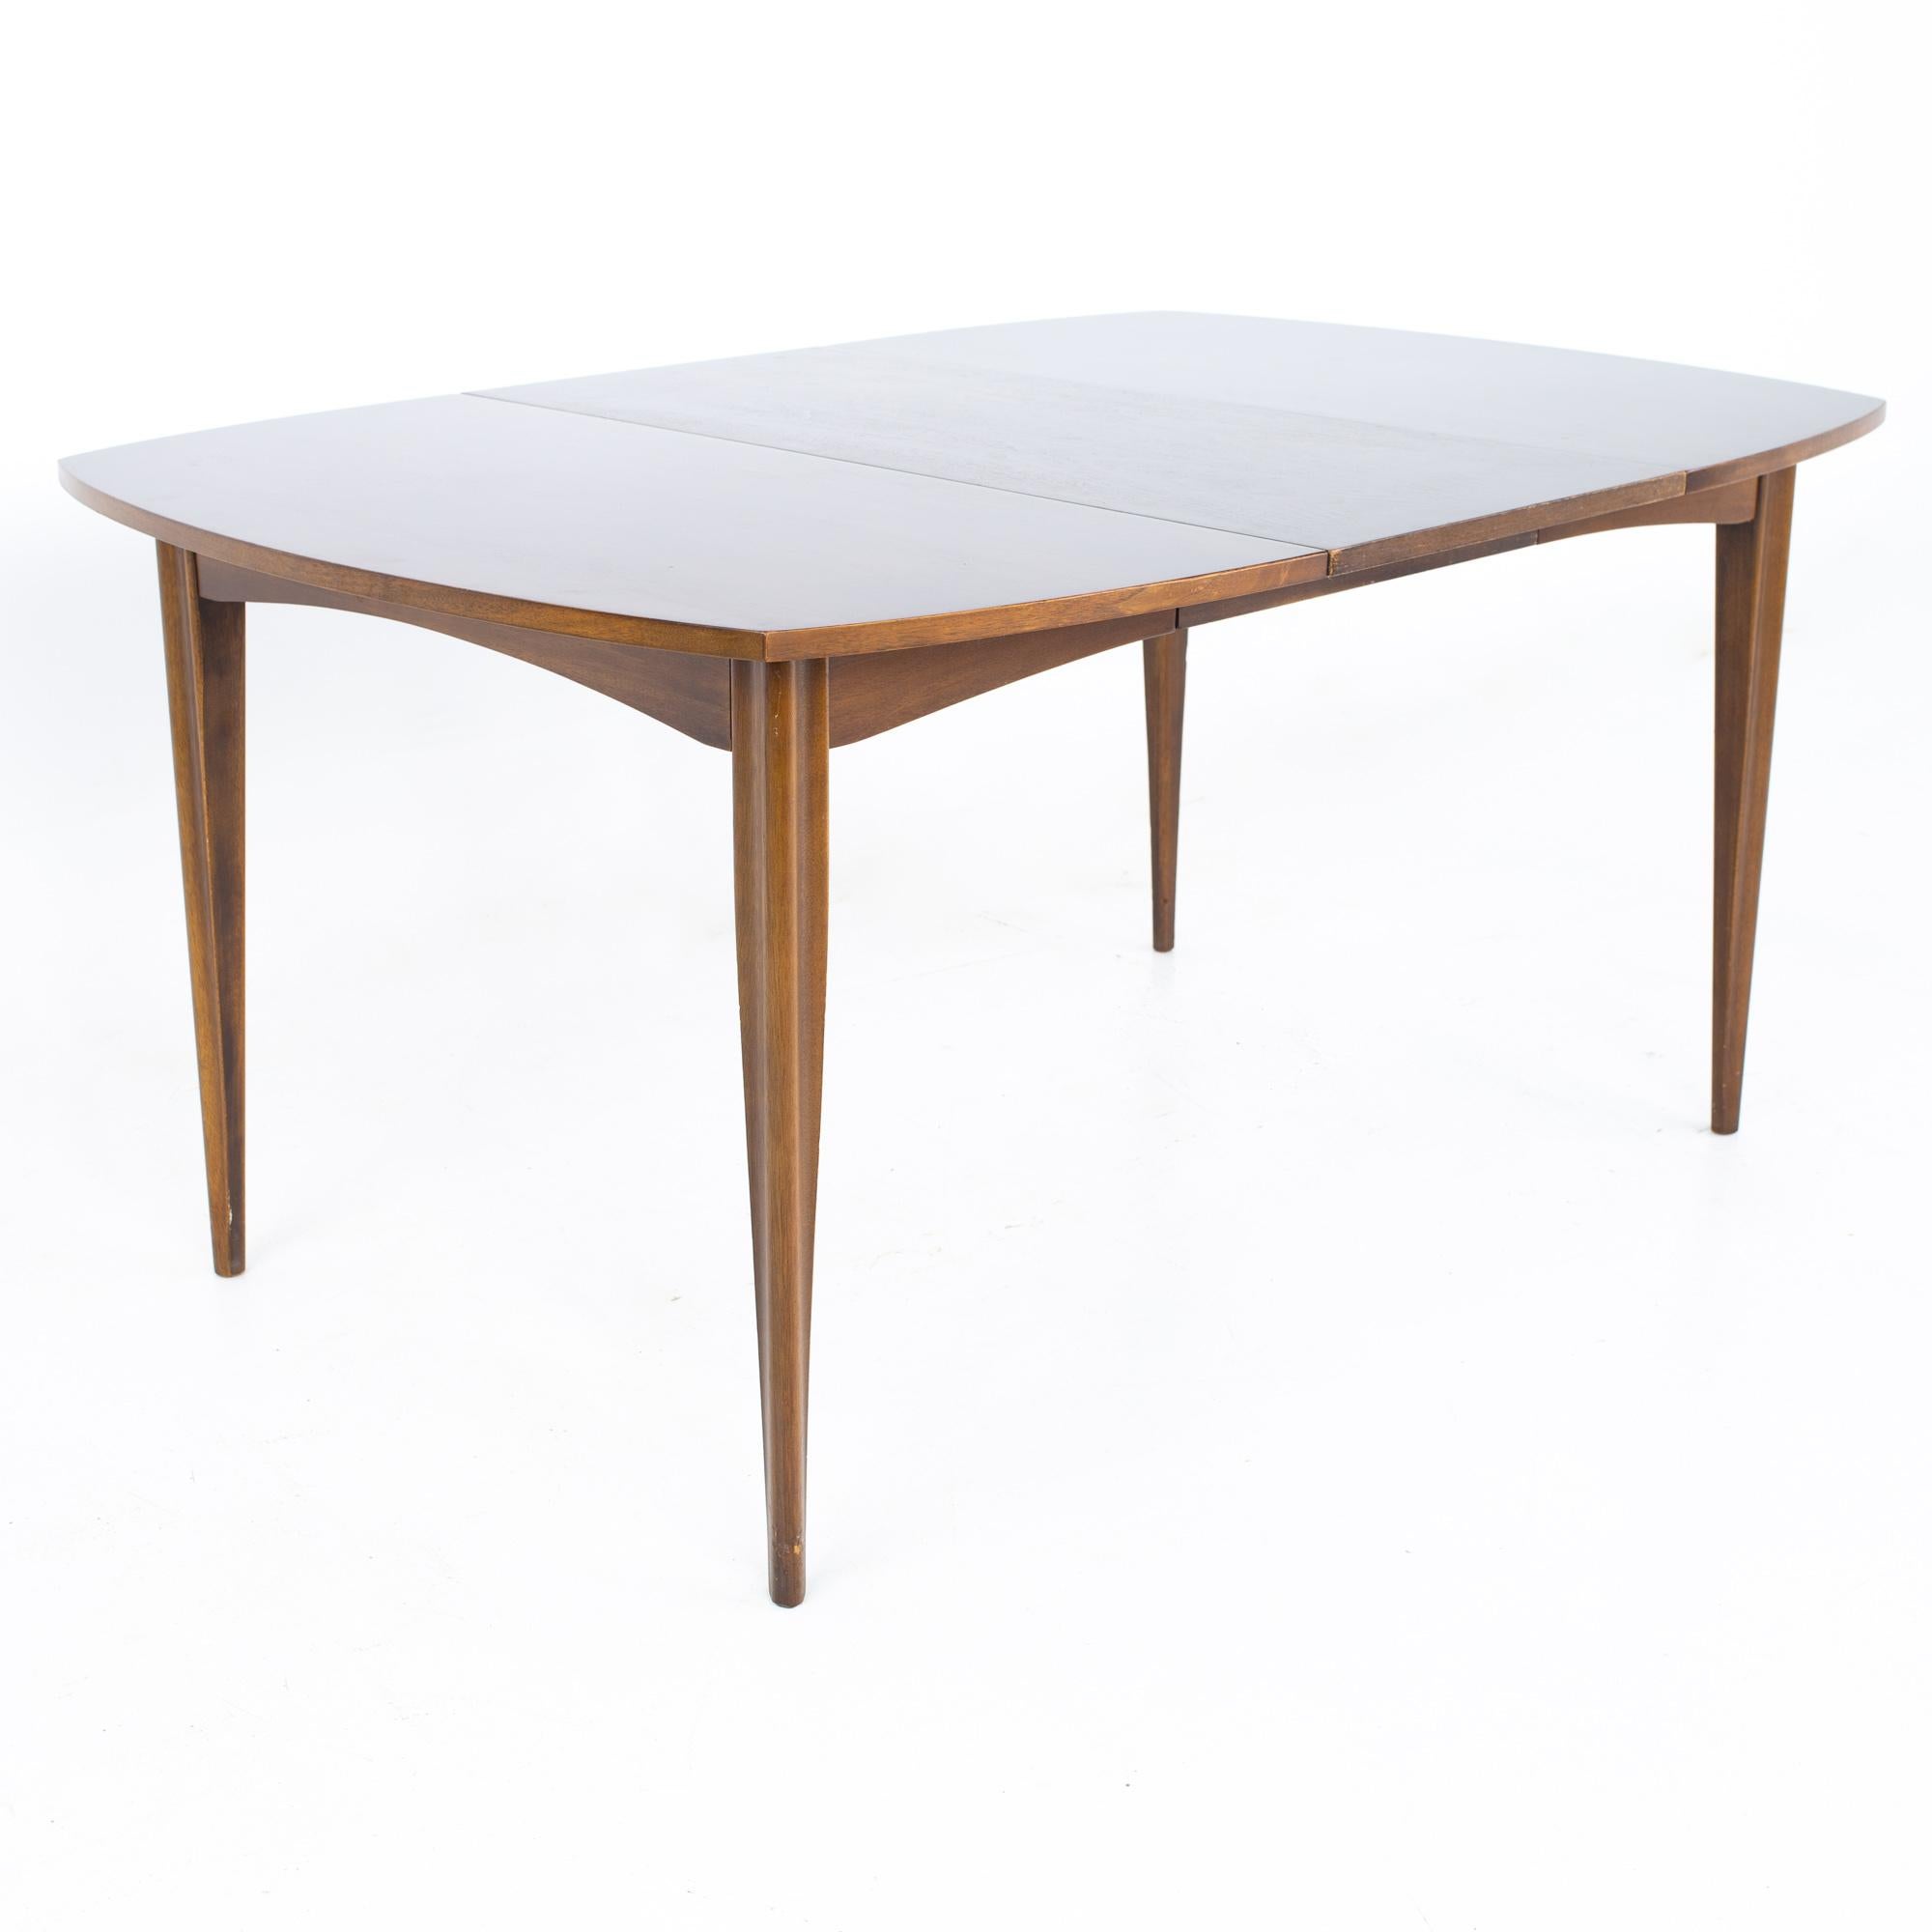 Late 20th Century Broyhill Emphasis Mid Century Walnut Surfboard Expanding Dining Table